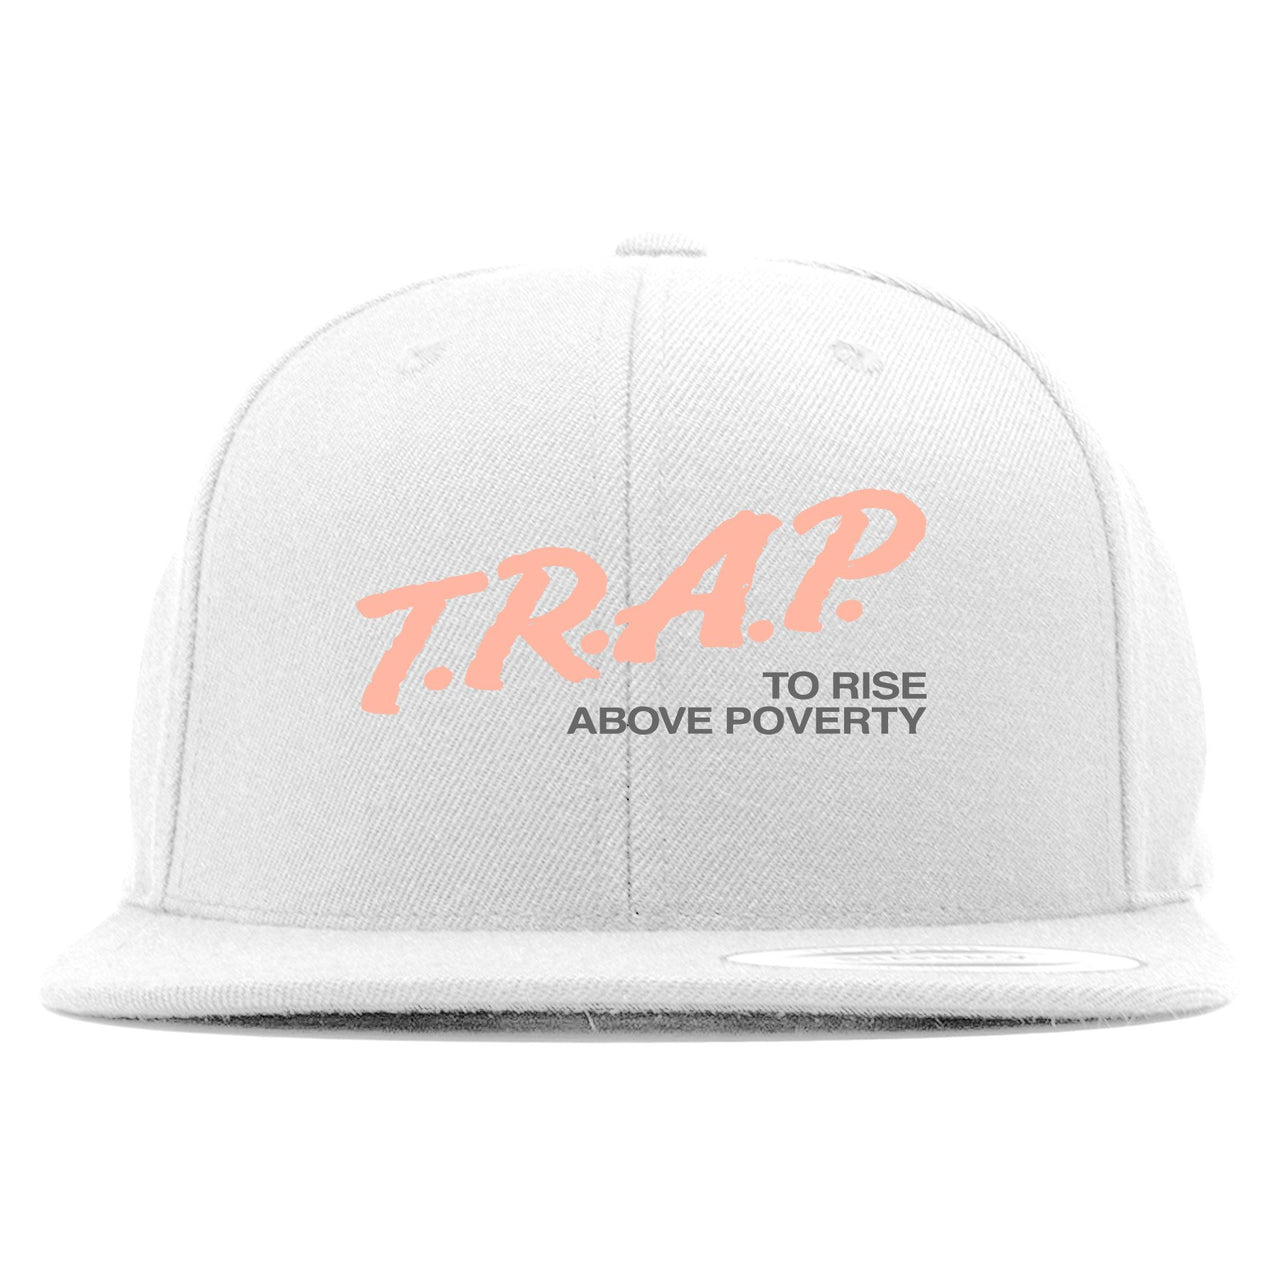 True Form v2 350s Snapback | Trap To Rise Above Poverty, White